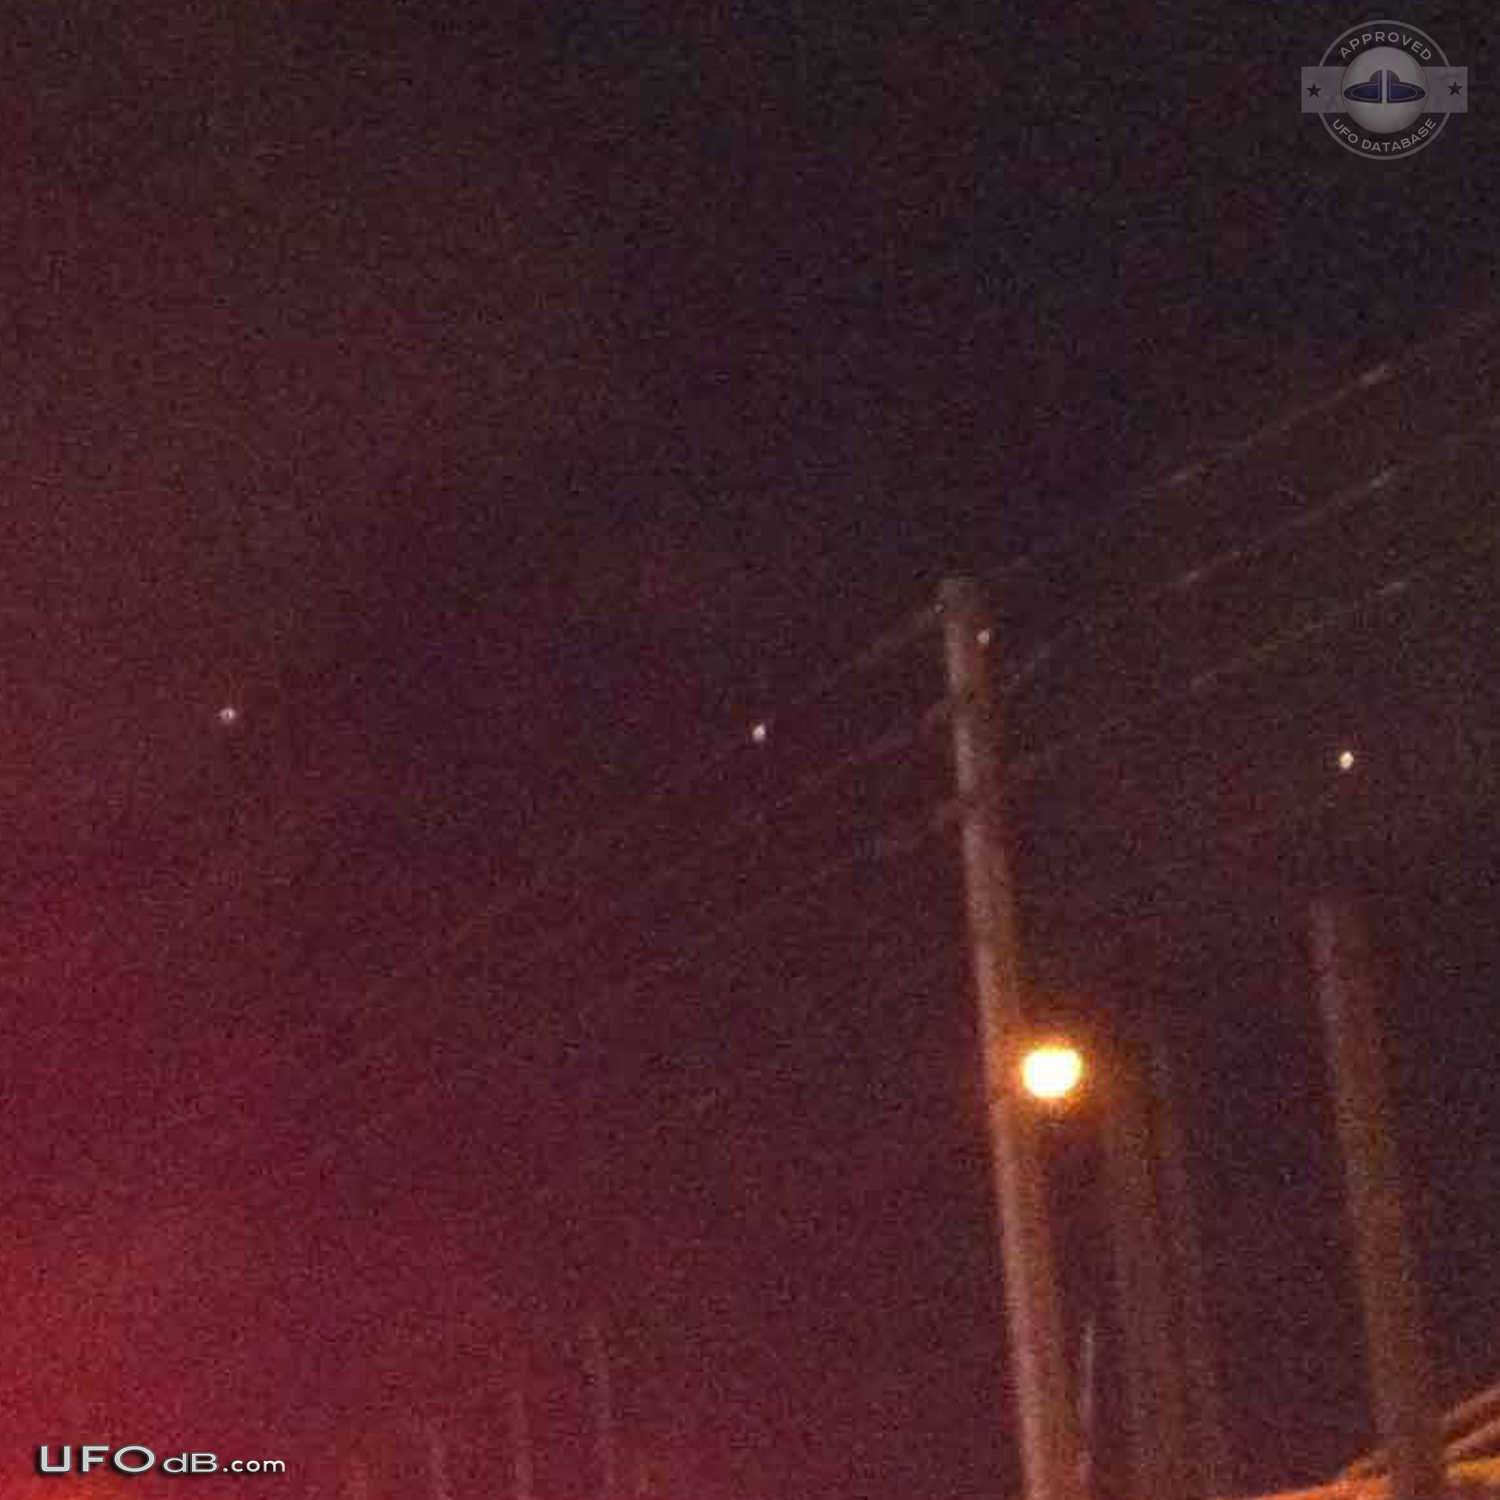 Many UFOs caught on picture near crossing - North Miami beach, Florida UFO Picture #388-4